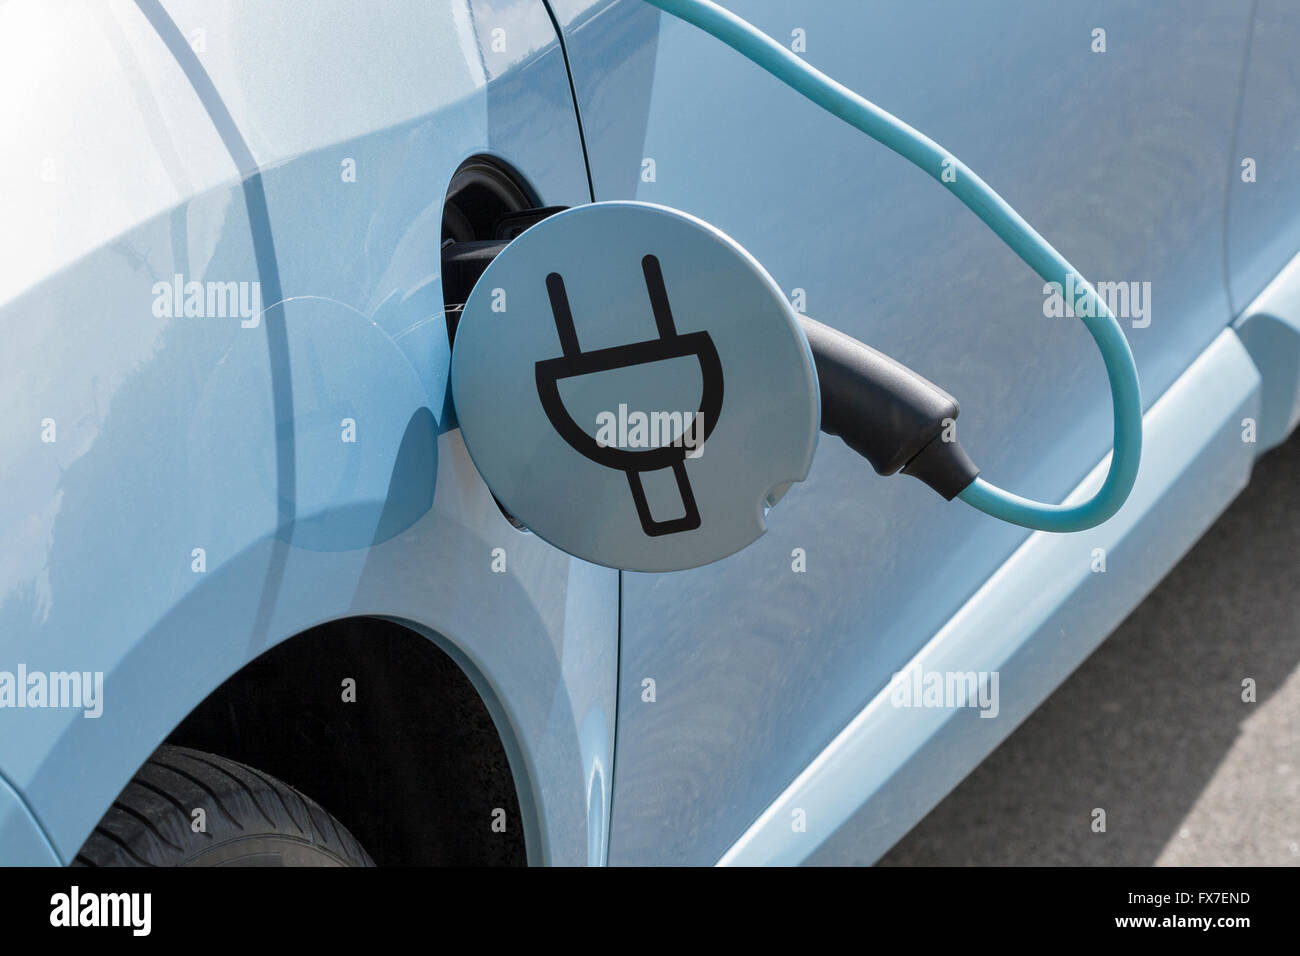 Charging an electric car with the power cable supply plugged in, closeup Stock Photo